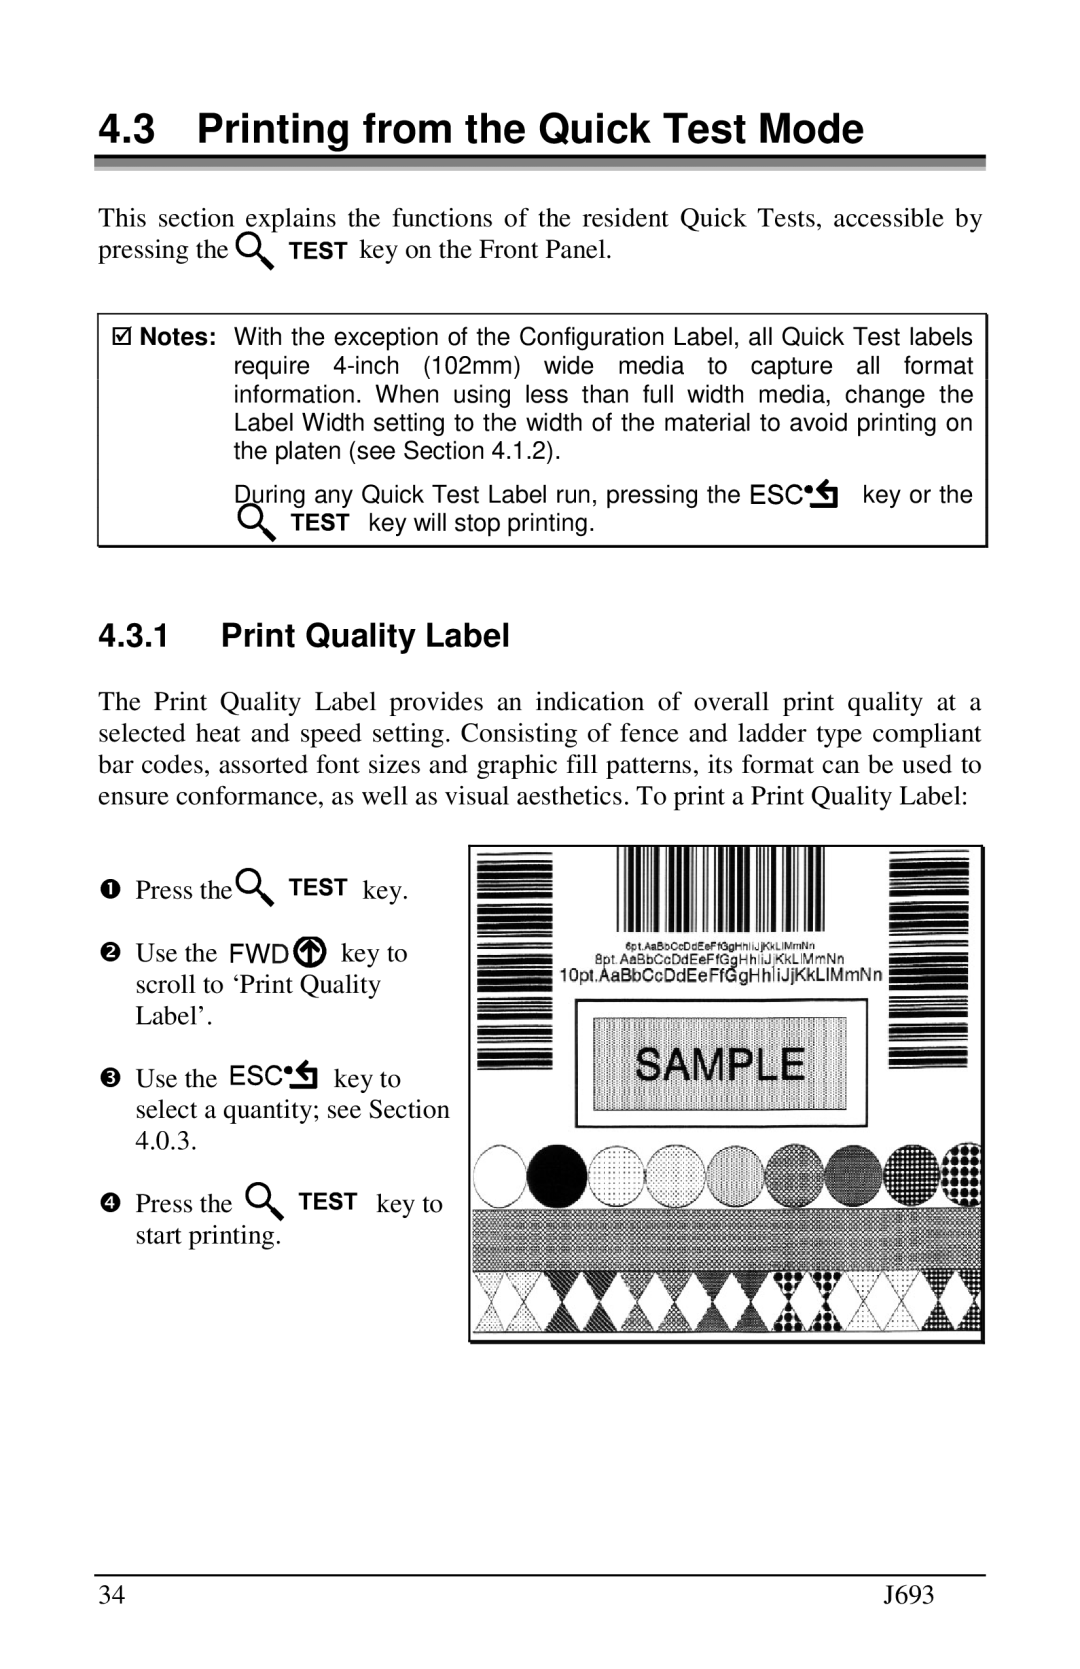 Pitney Bowes J693 manual Printing from the Quick Test Mode, Print Quality Label 